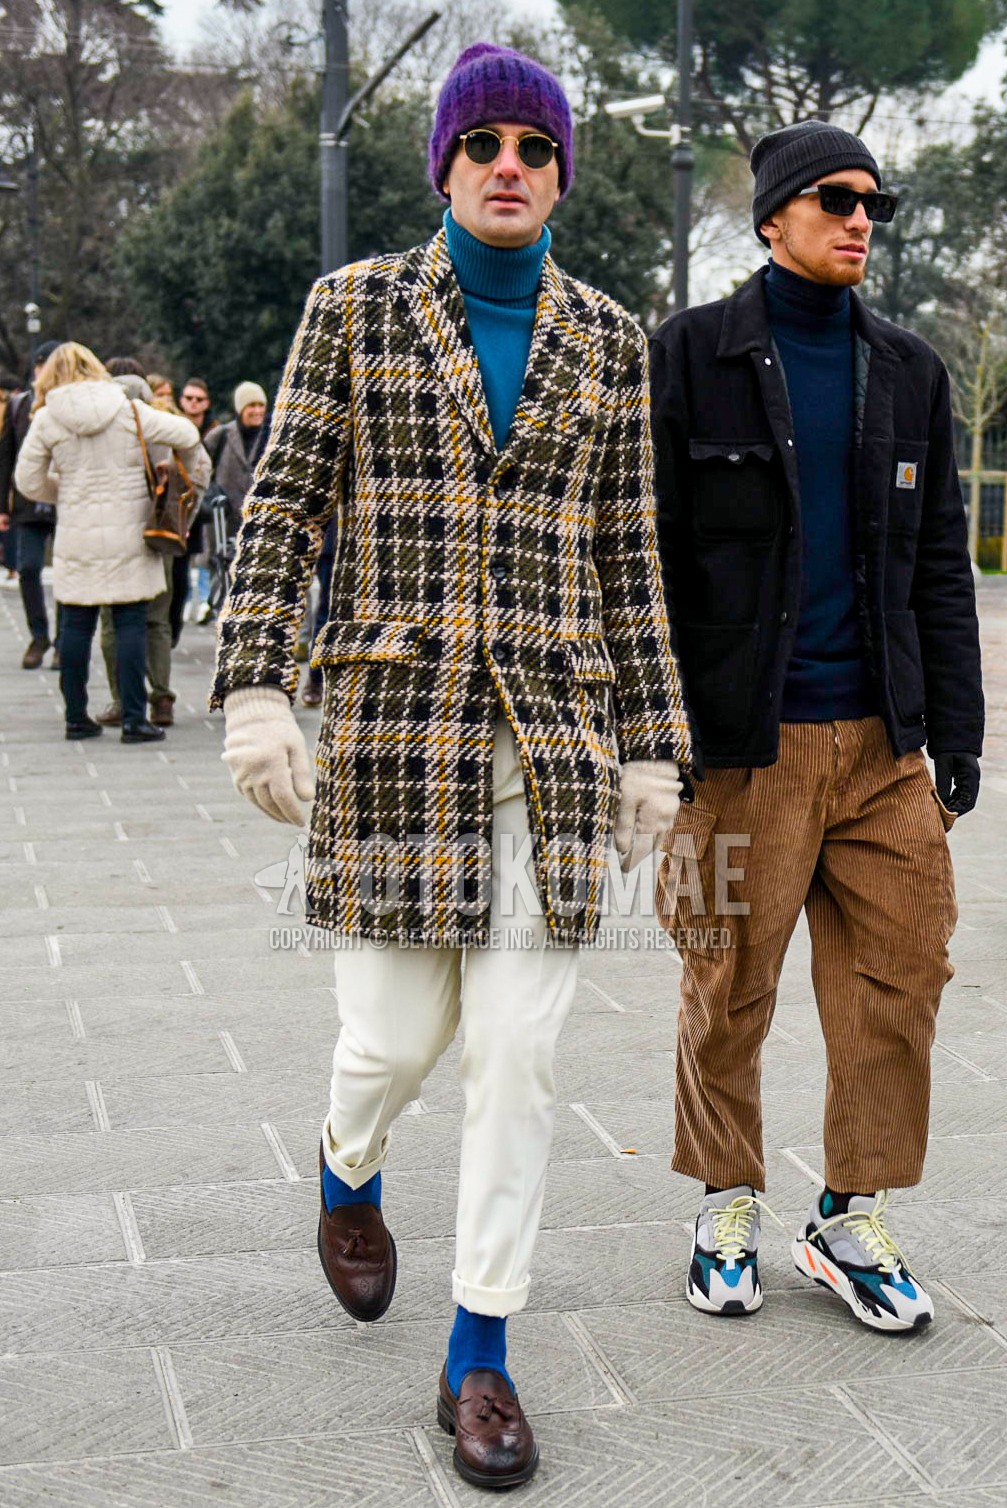 Men's winter outfit with purple plain knit cap, plain sunglasses, beige navy check chester coat, blue plain sweater, white plain slacks, blue plain socks, brown tassel loafers leather shoes.